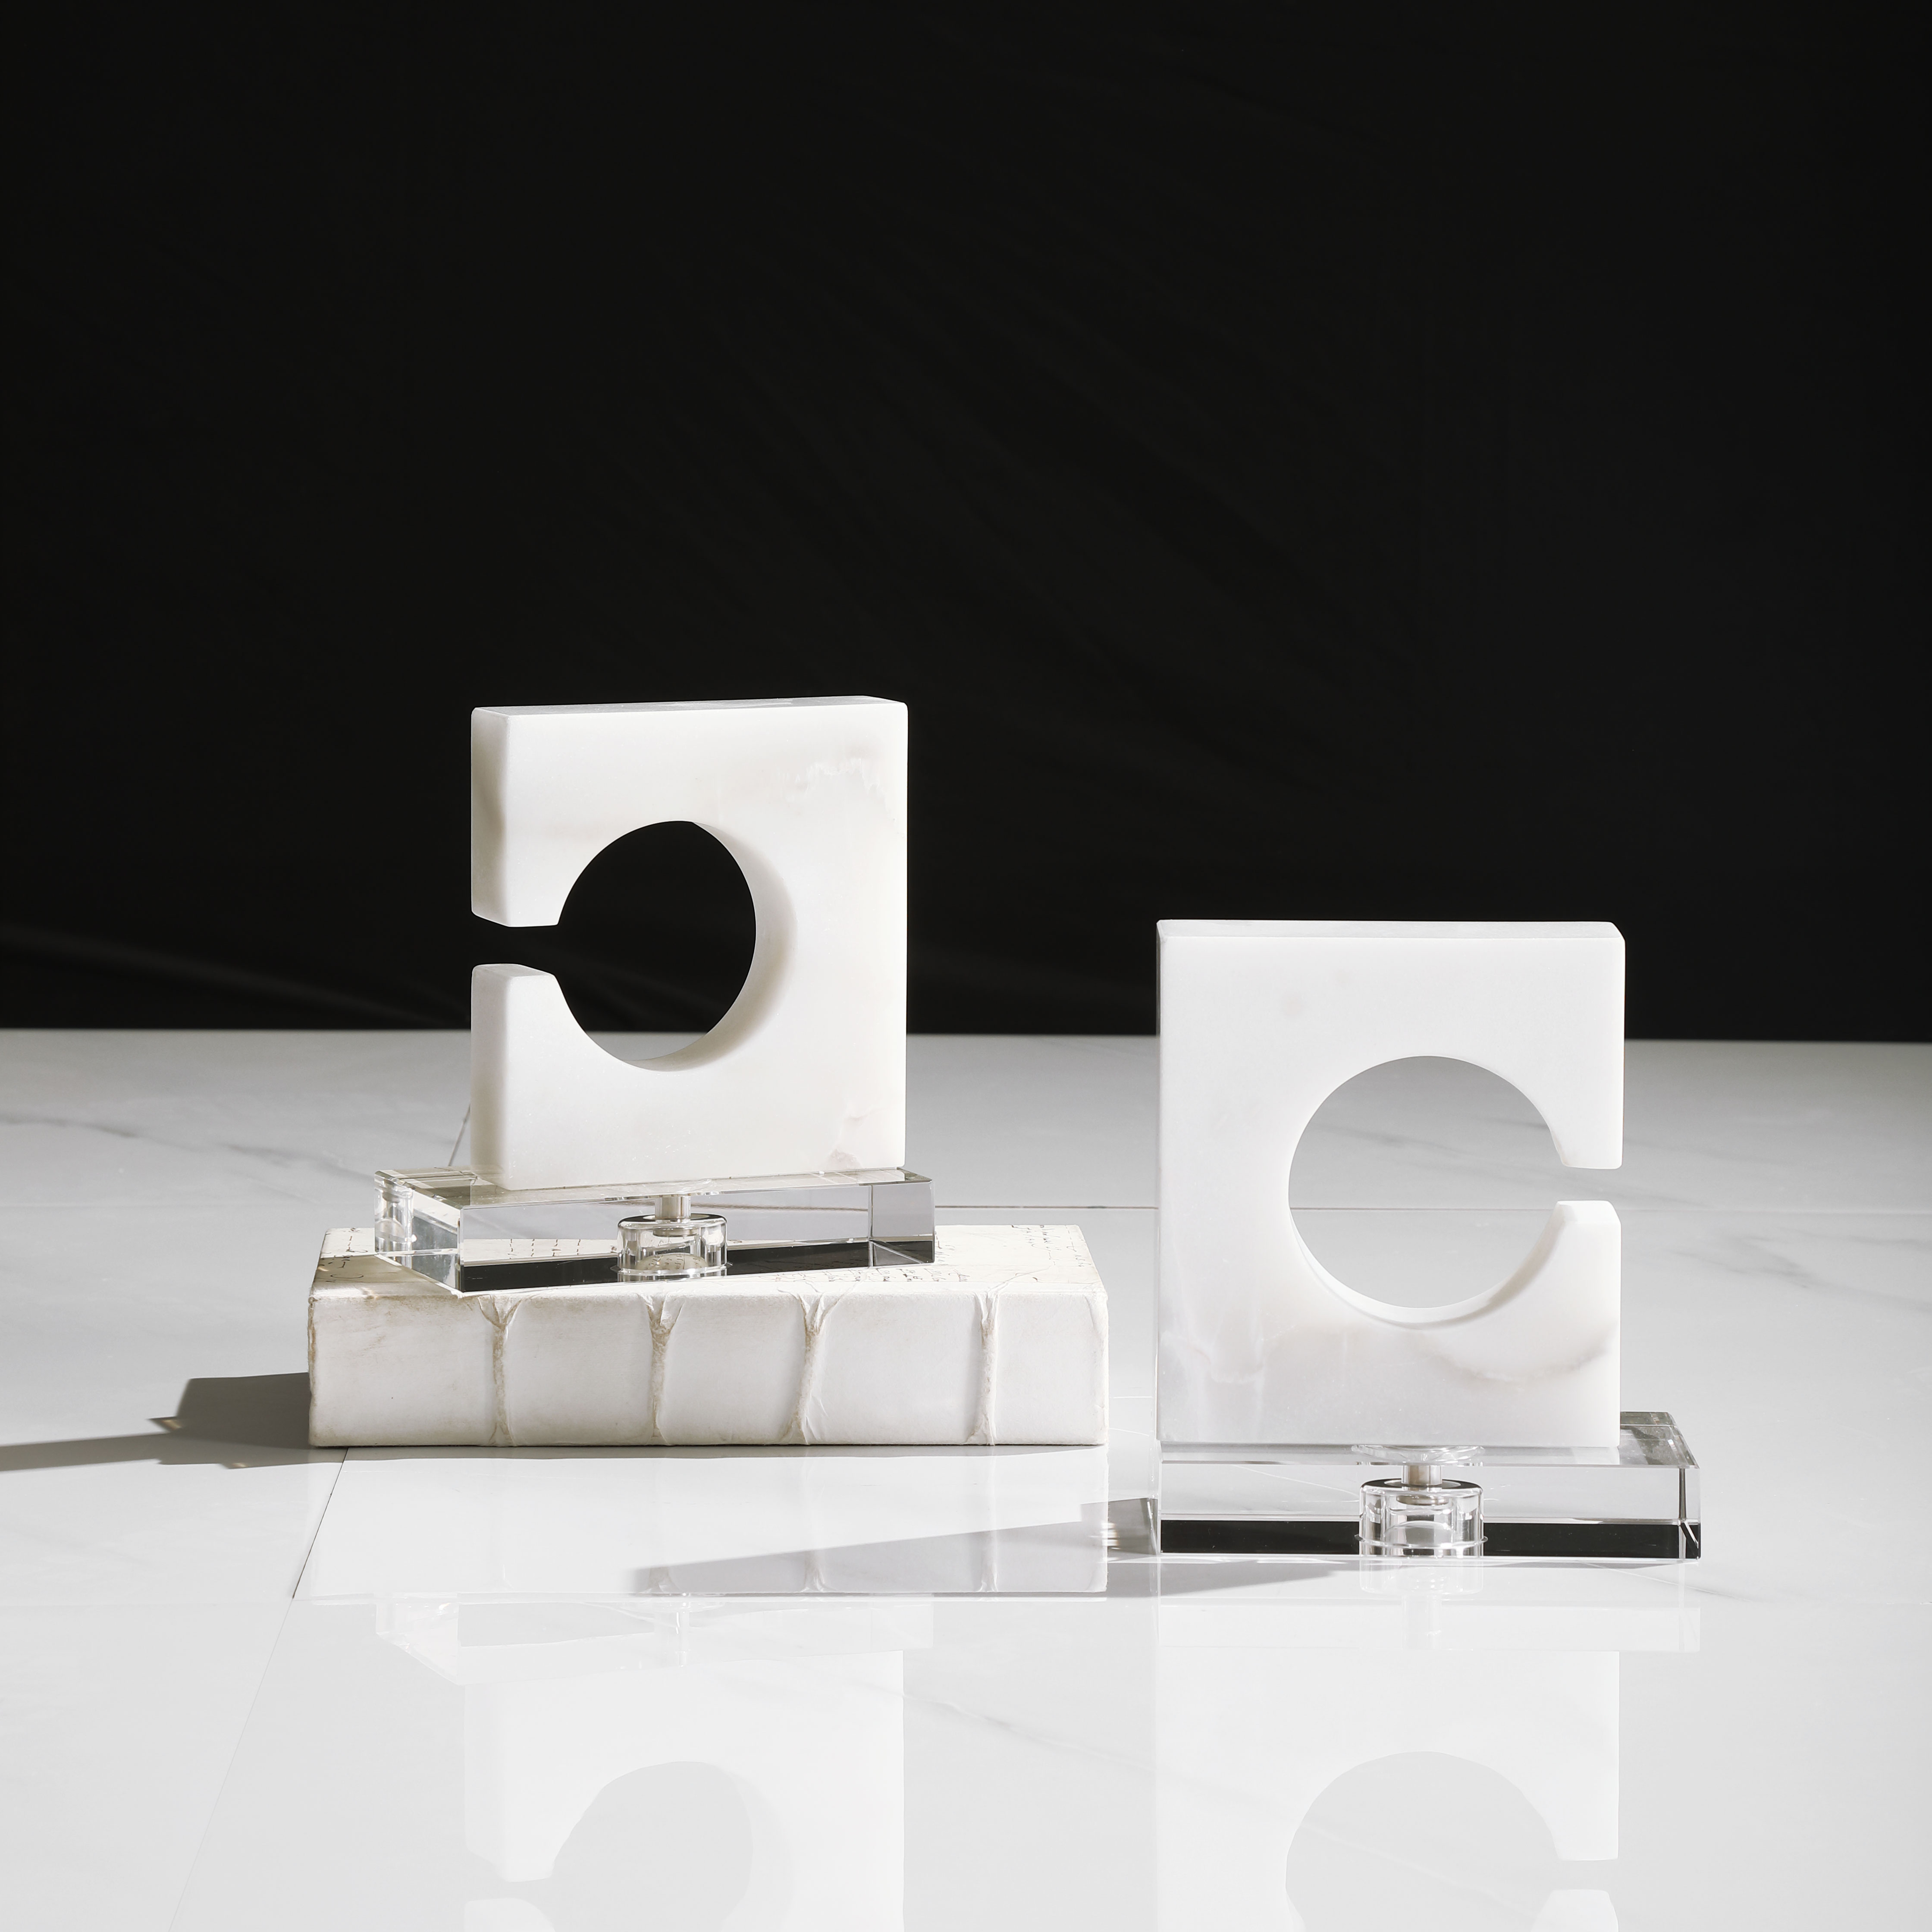 Clarin White & Gray Bookends, S/2 - Hudsonhill Foundry